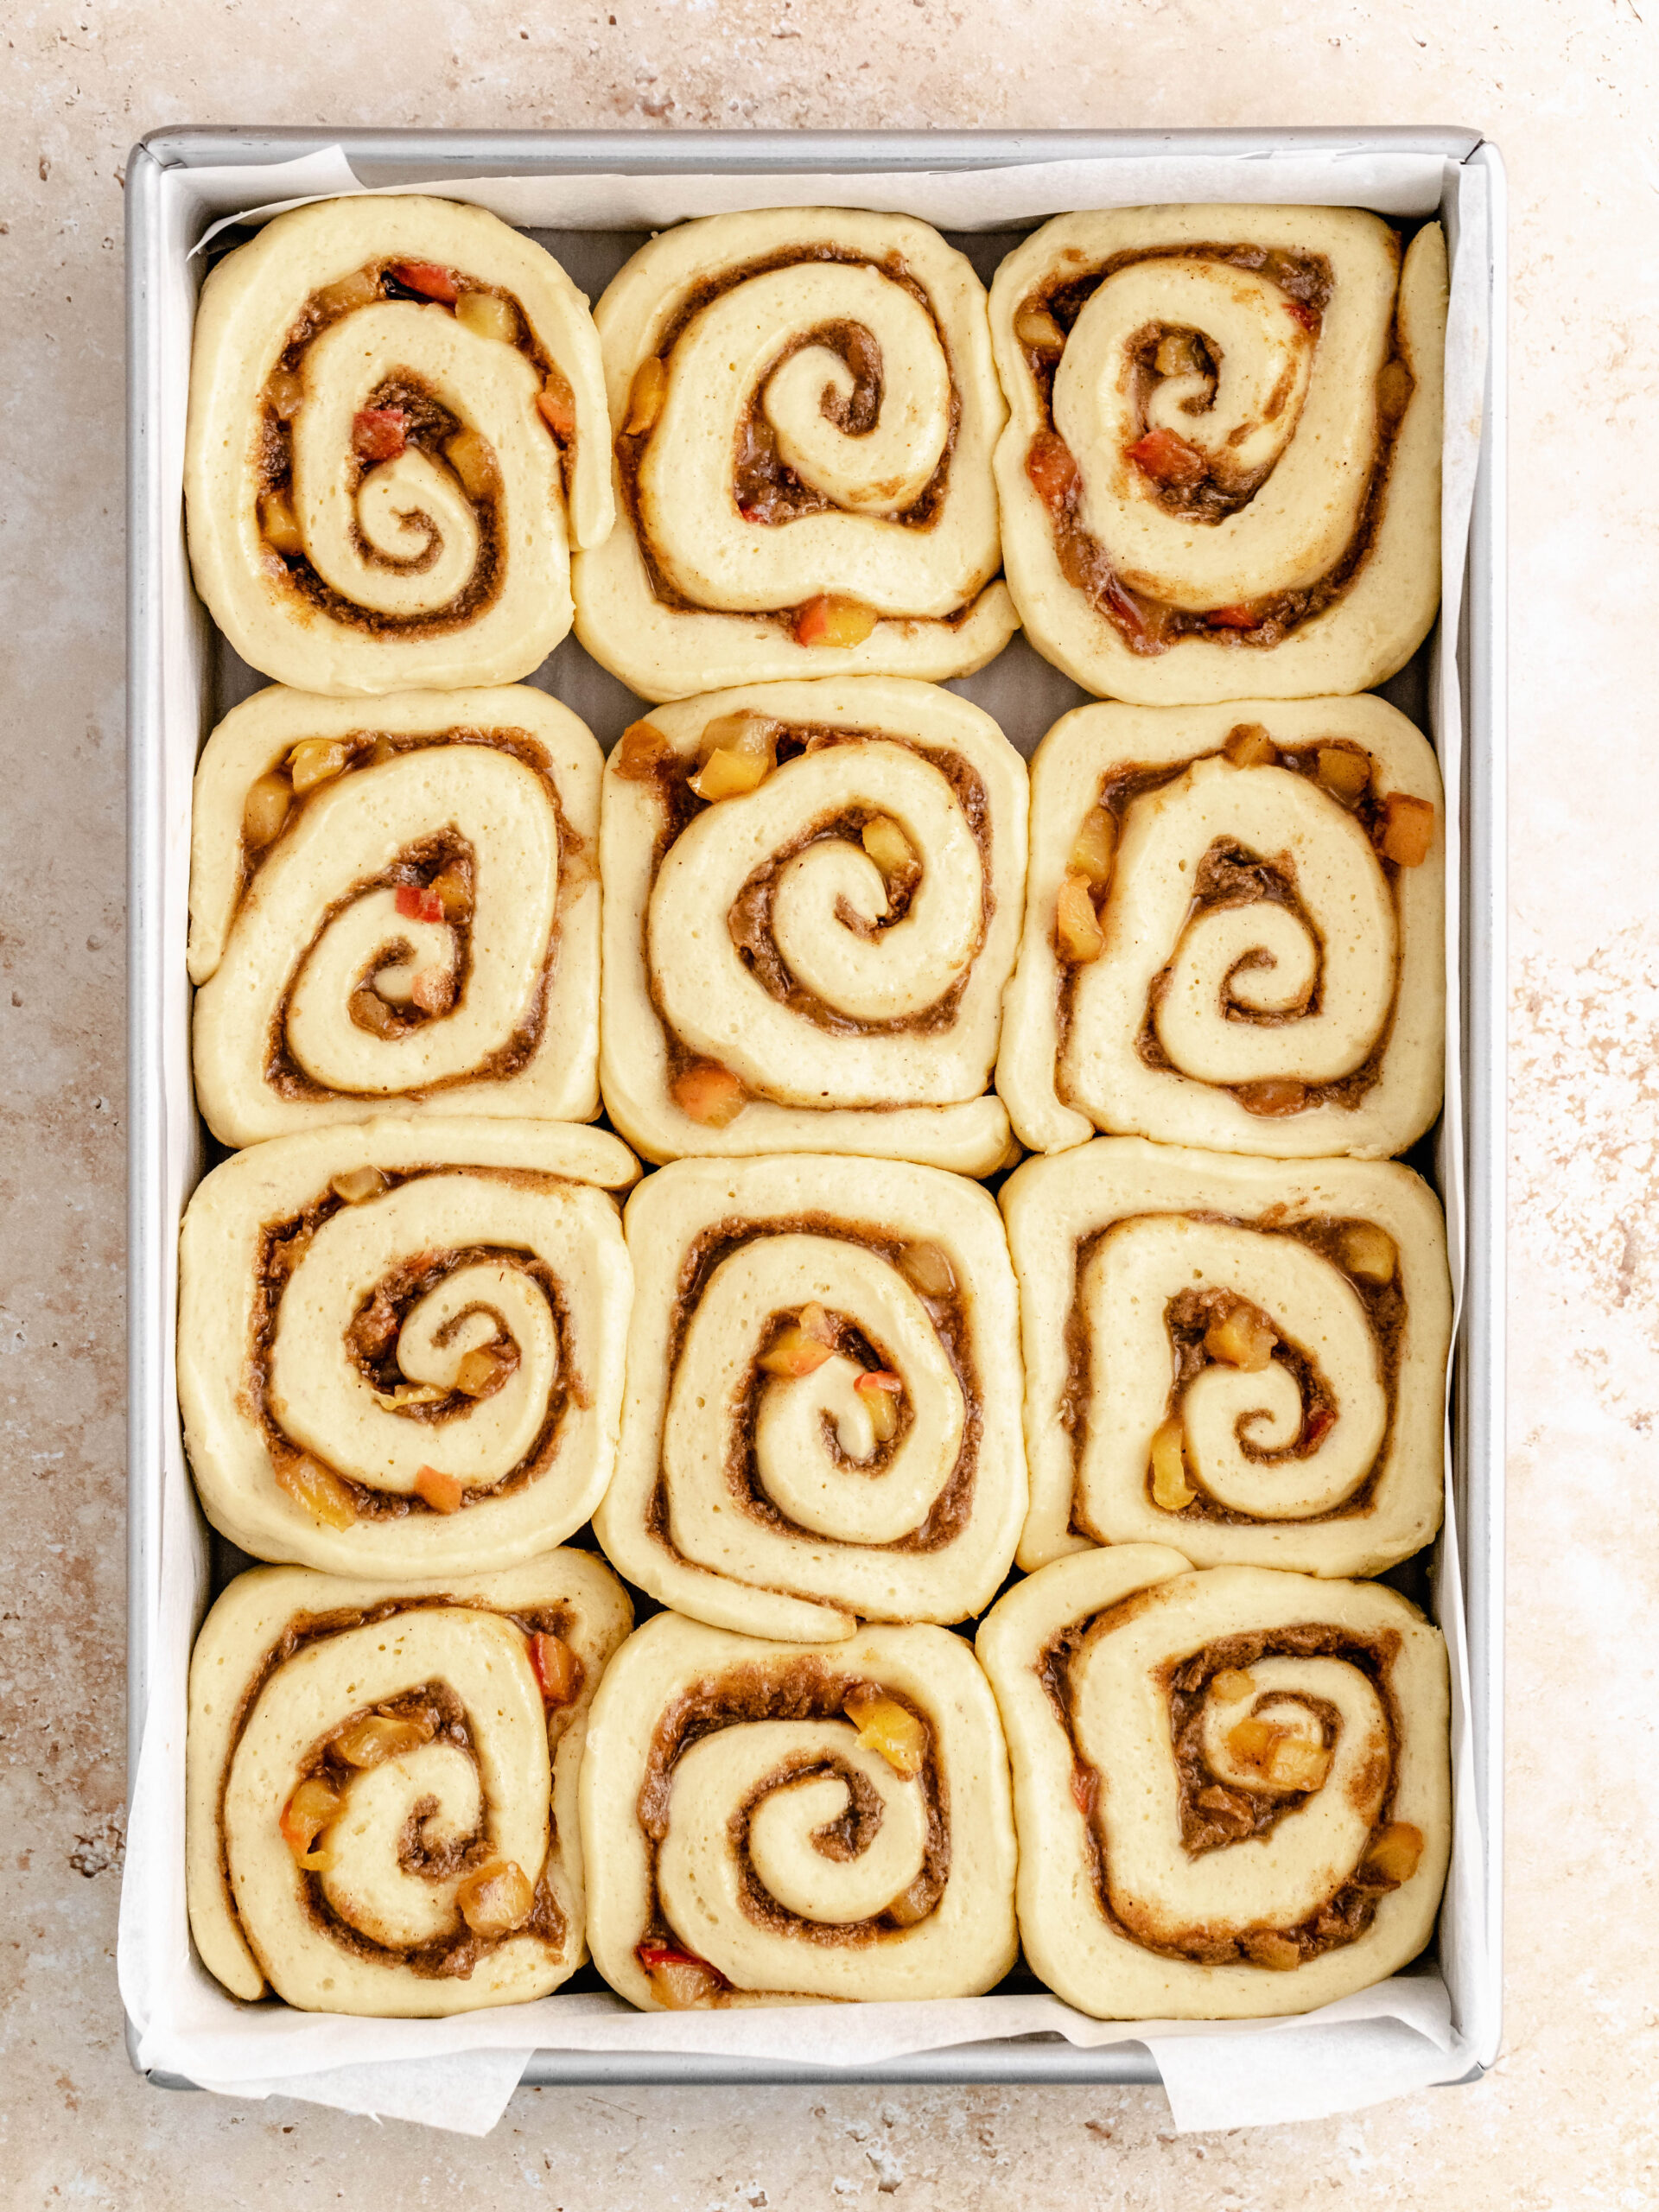 Cinnamon Rolls with Apple Pie filling after their second proofing.